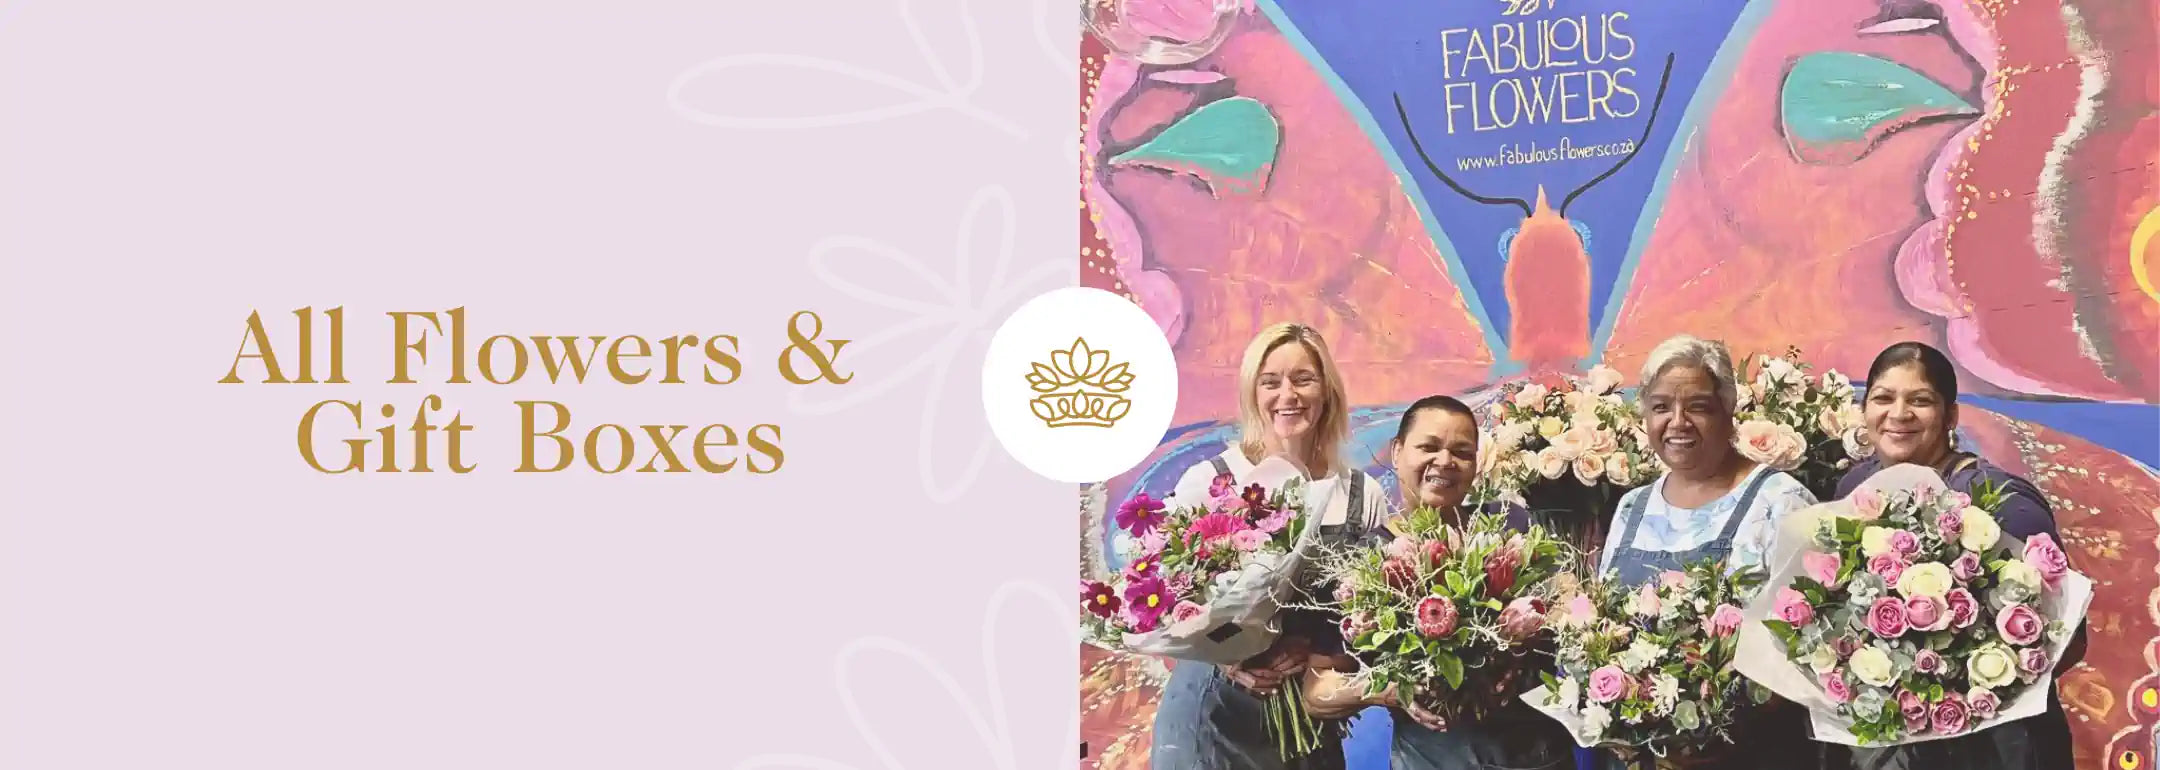 All Flowers and Gift Boxes: Smiling Florists Holding Stunning Flower Arrangements for Every Occasion. Fabulous Flowers and Gifts.